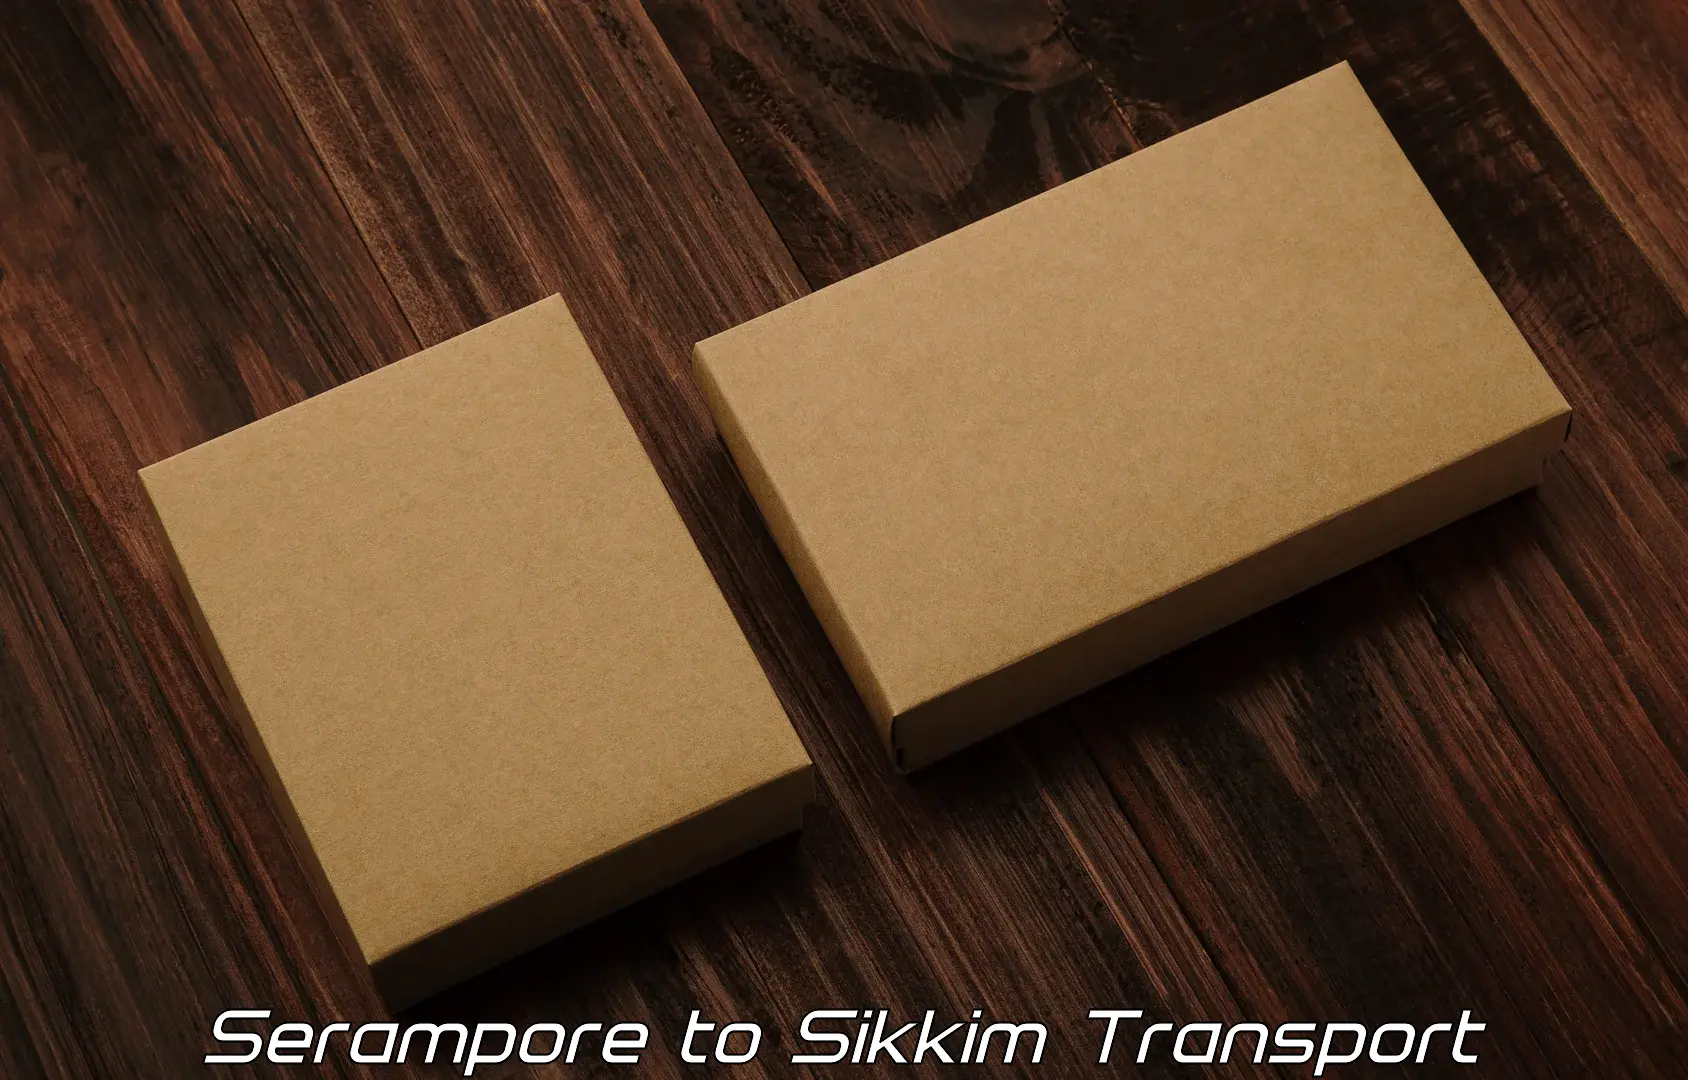 Nearby transport service Serampore to East Sikkim